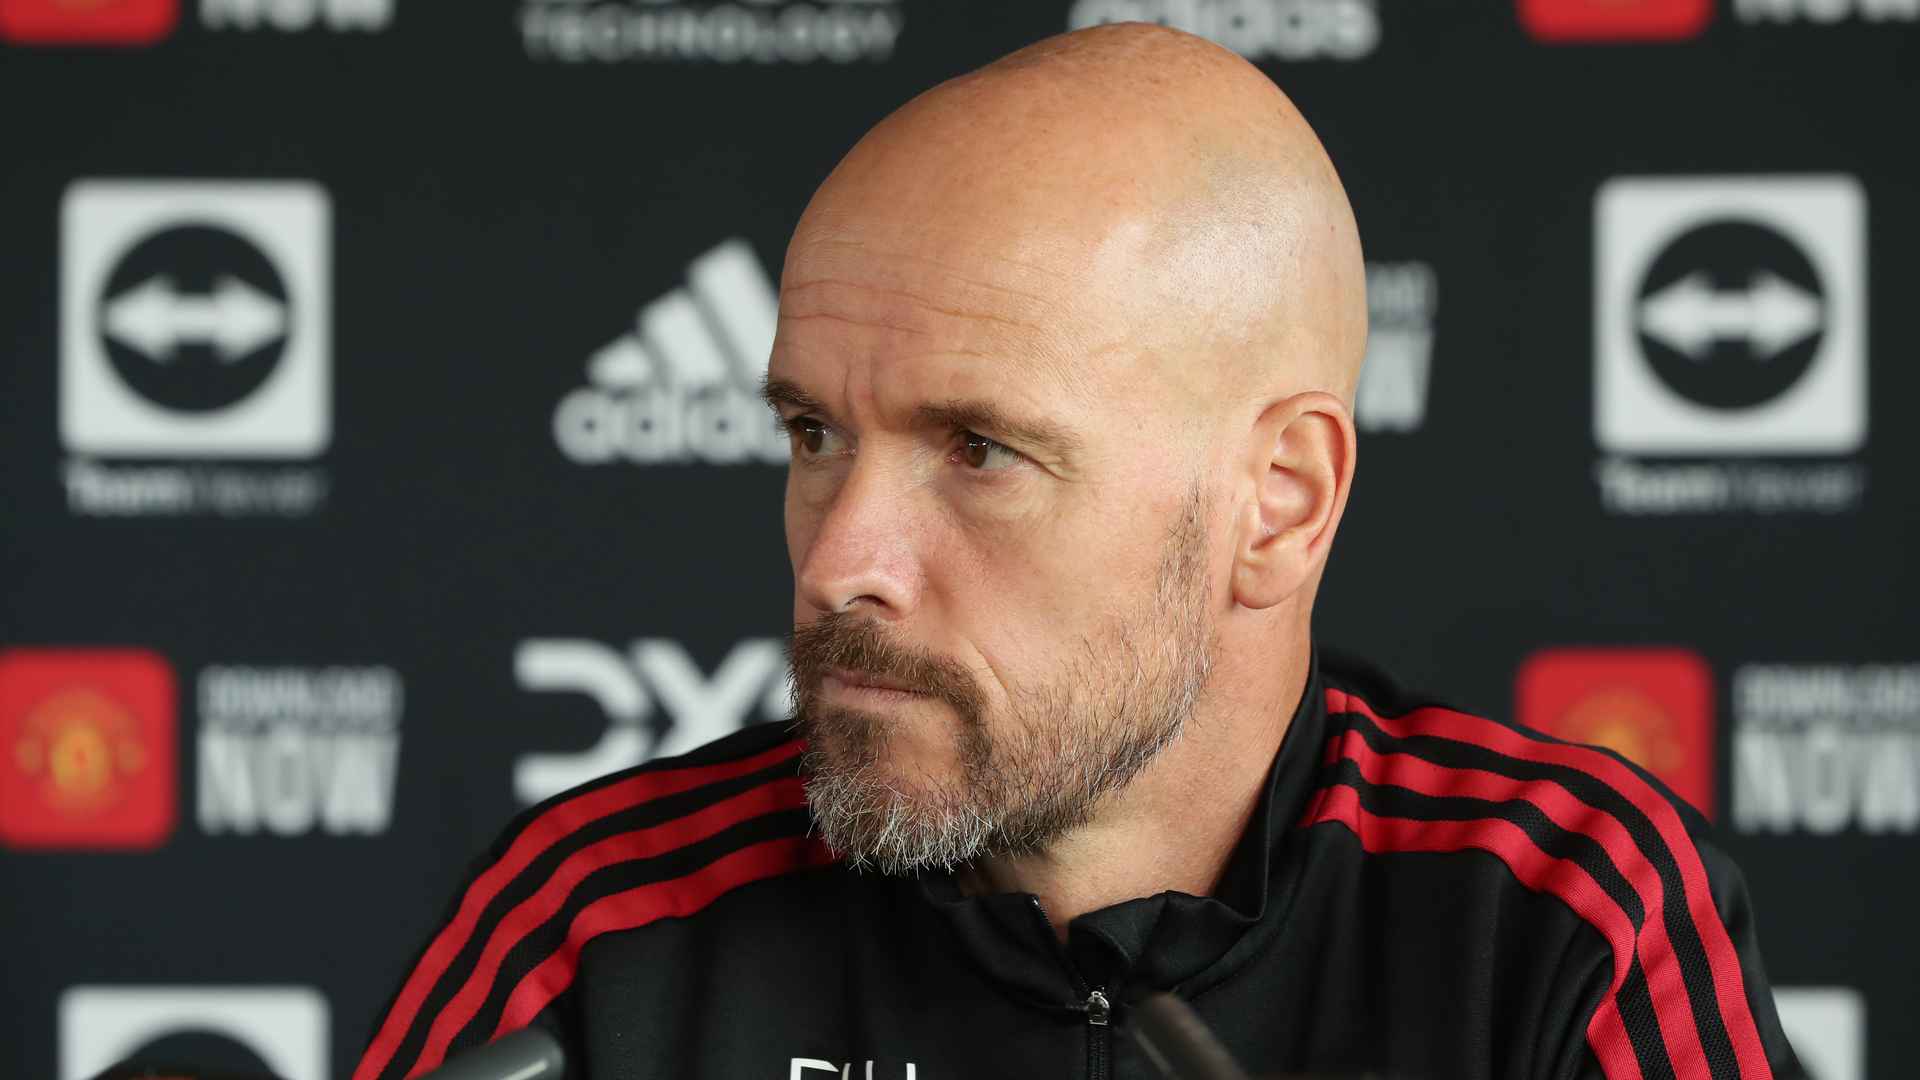 Part two Ten Hag press conference previewing Leicester v Man Utd – Man Utd